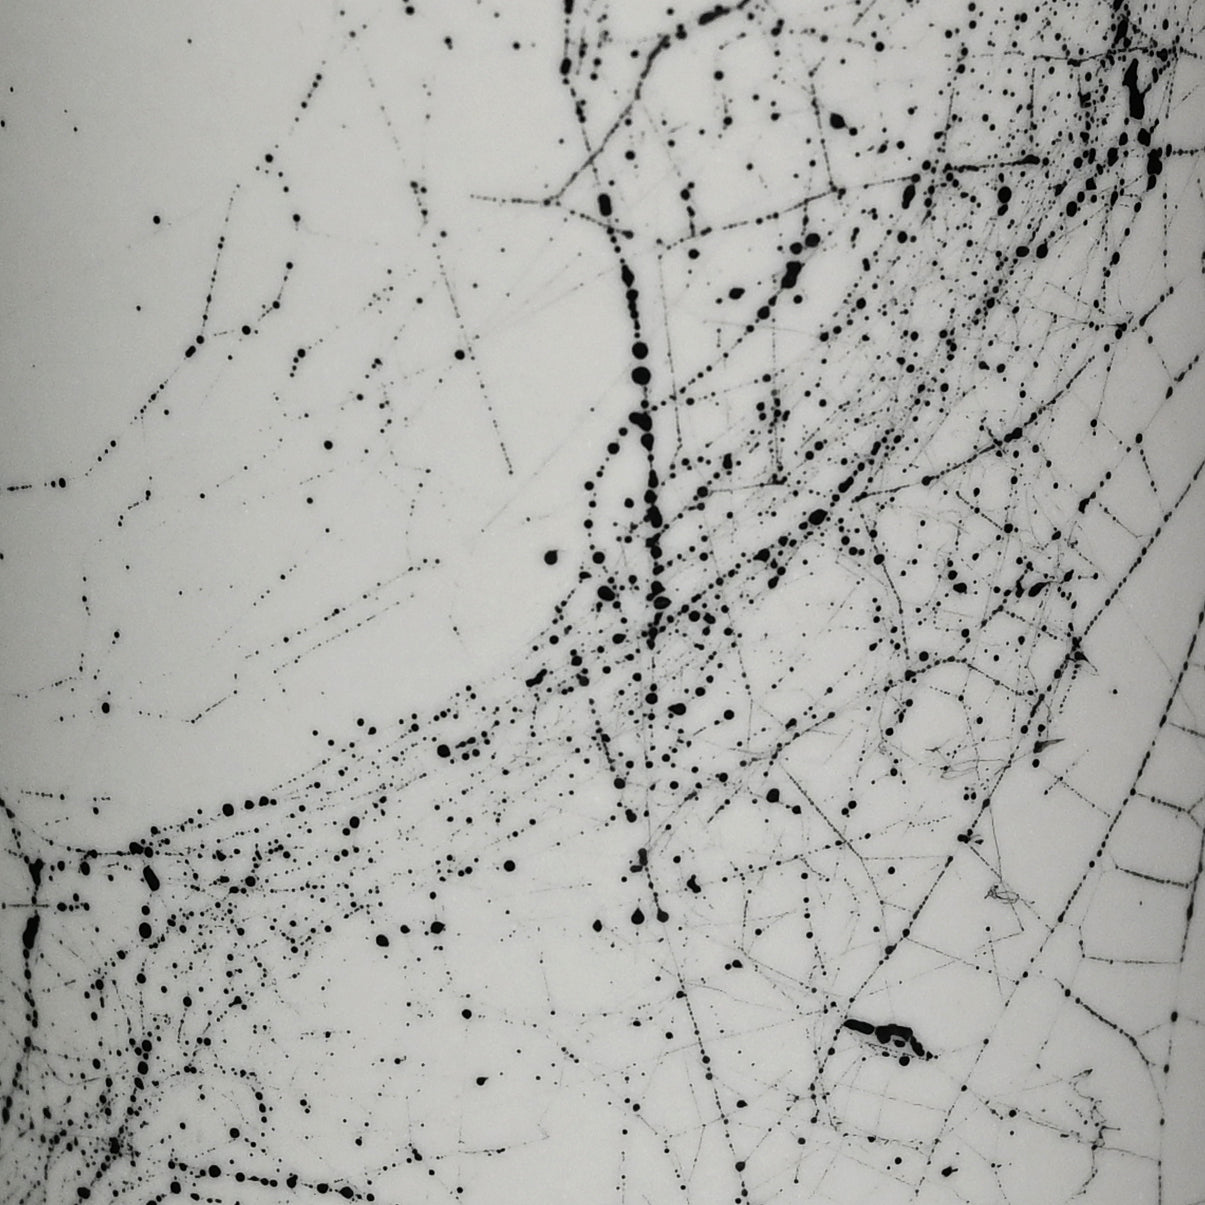 Web on Clay (195), Collected September 19, 2022